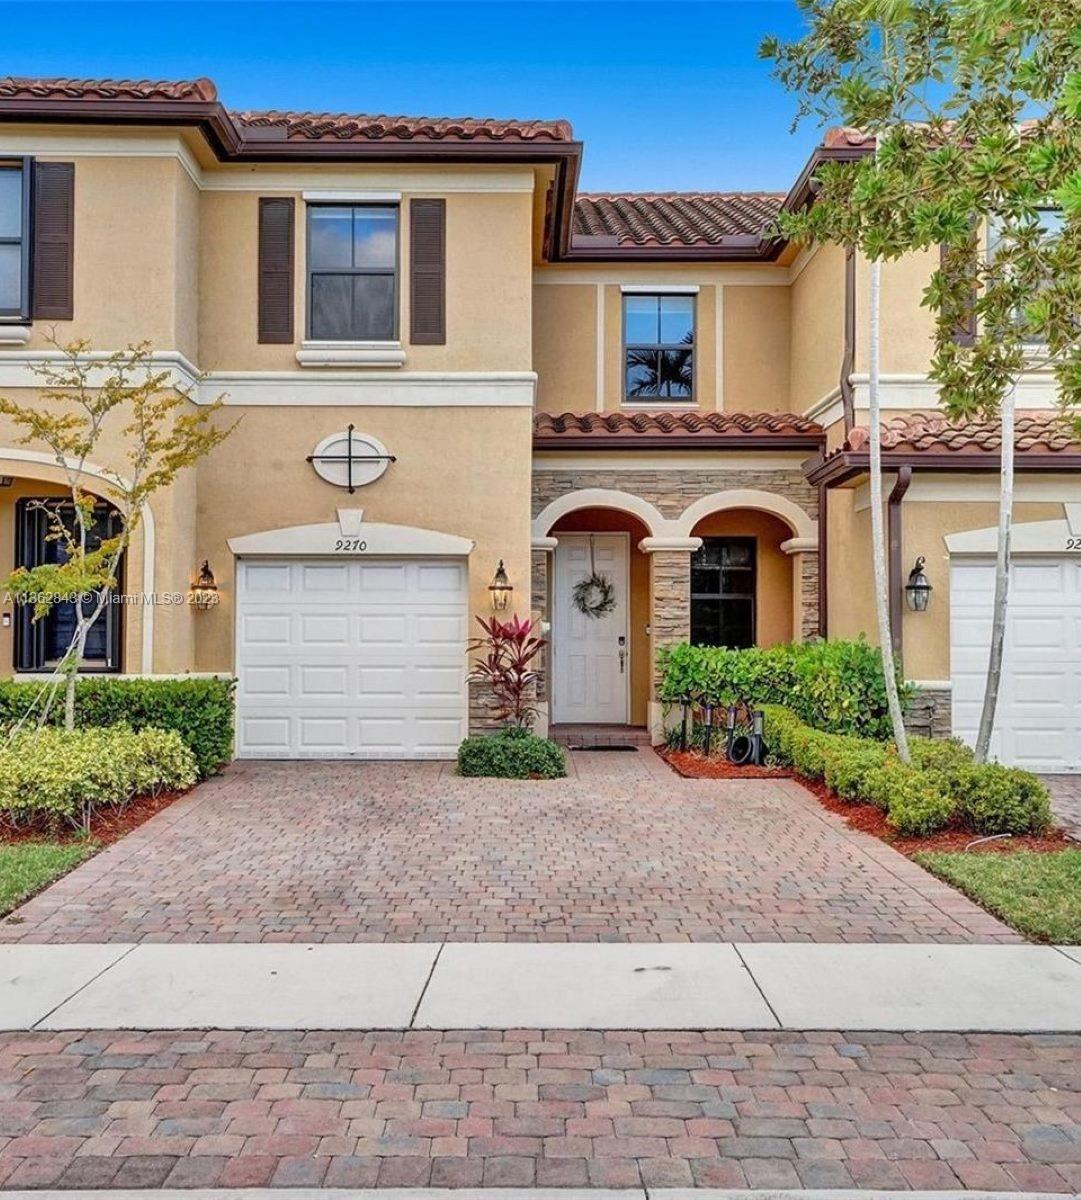 Welcome to this beautiful lakefront Townhouse in the gated community of Boterra. Resort style clubhouse, pool, gym, billiards, and a spacious living room and a children's playroom. This home features a 1 car garage and 3 car addtl parking in the driveway. Plenty of space in the backyard to enjoy with your love ones!